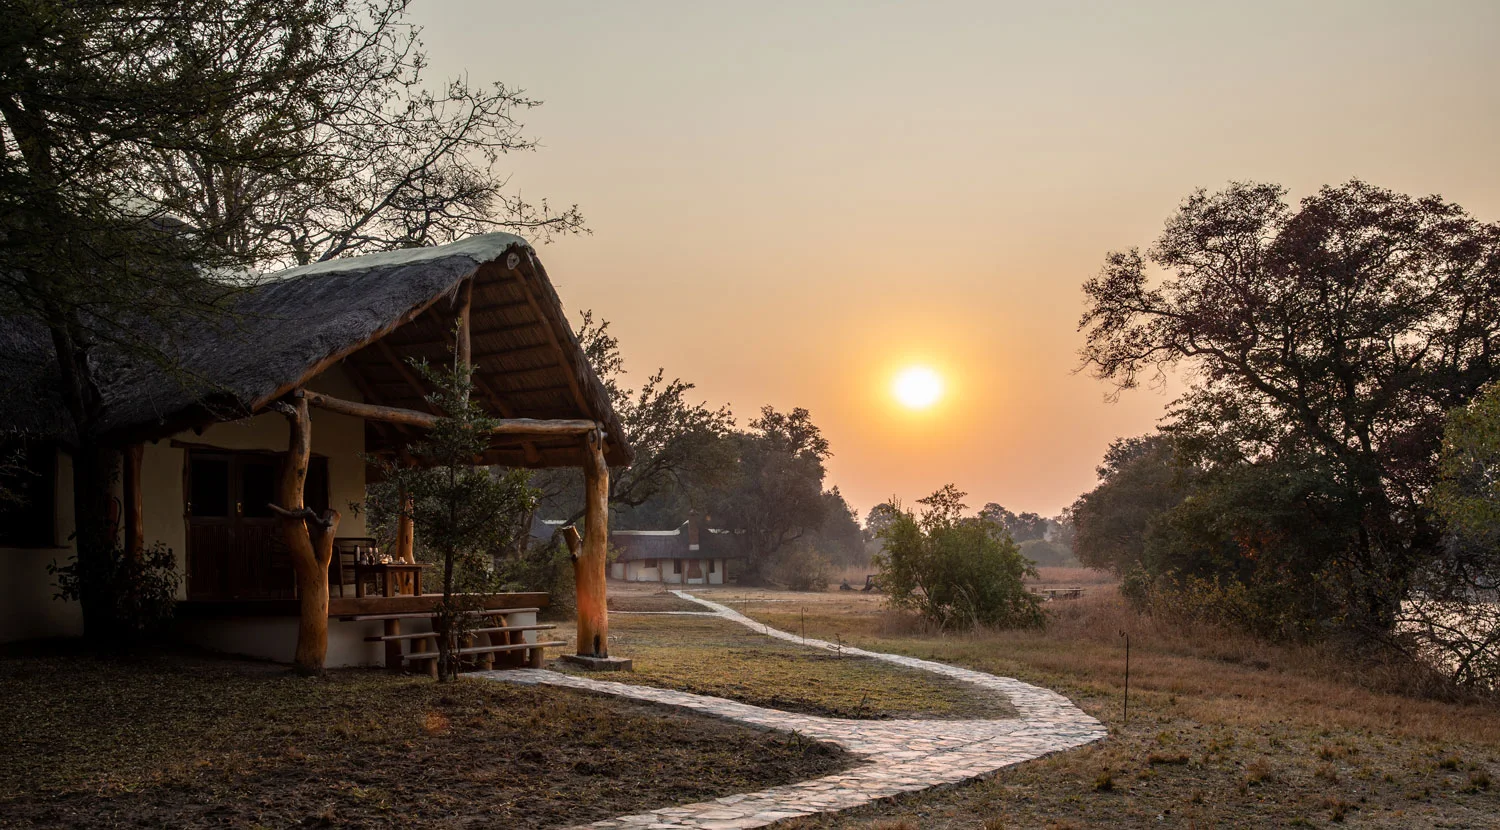 10 Day Exploring the Stunning Scenery and Wildlife of Kafue National Park